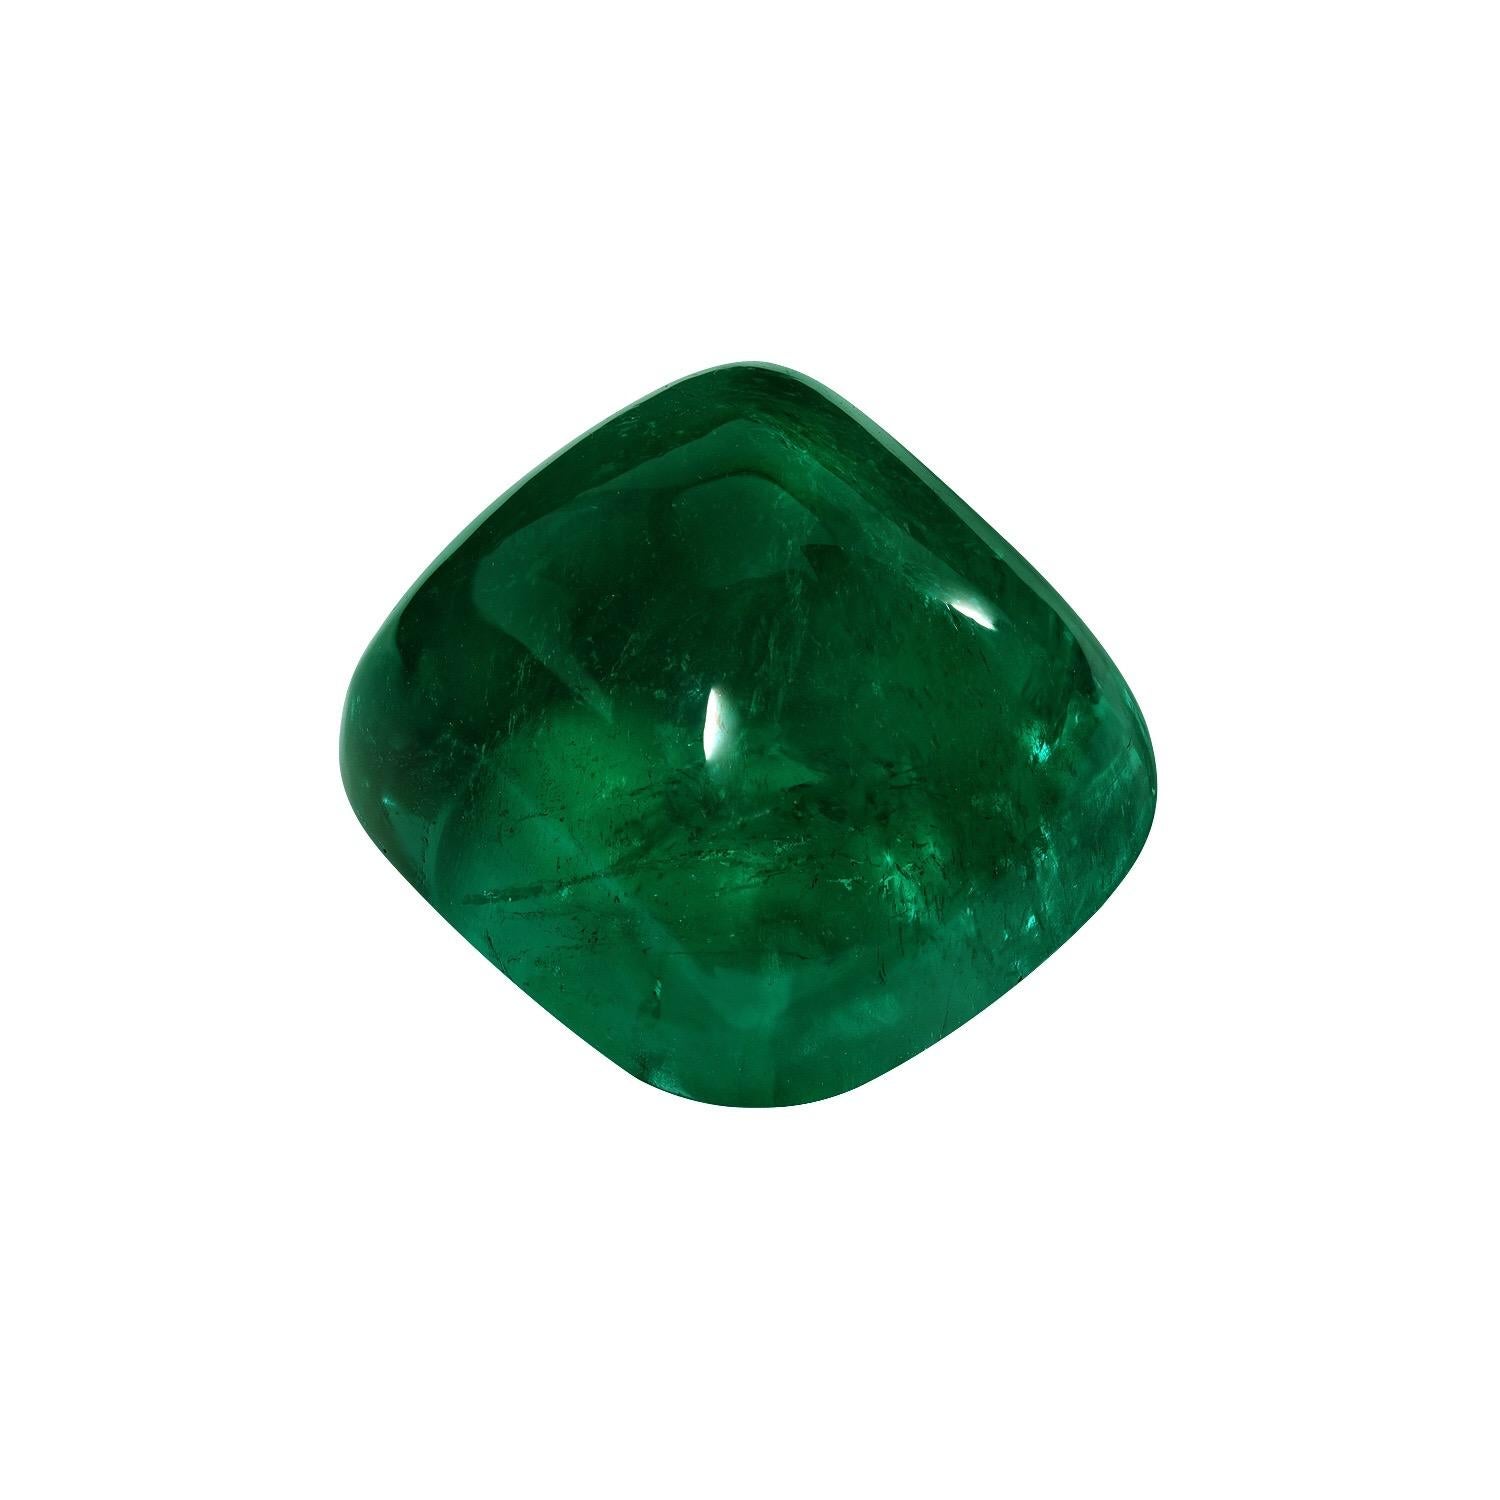 Ultra rare and exclusive, collection quality, Colombian Emerald sugarloaf cabochon, offered loose to the world's most avid gem connoisseurs.
This superb gem is AGL certified, with indications of only insignificant clarity enhancement.